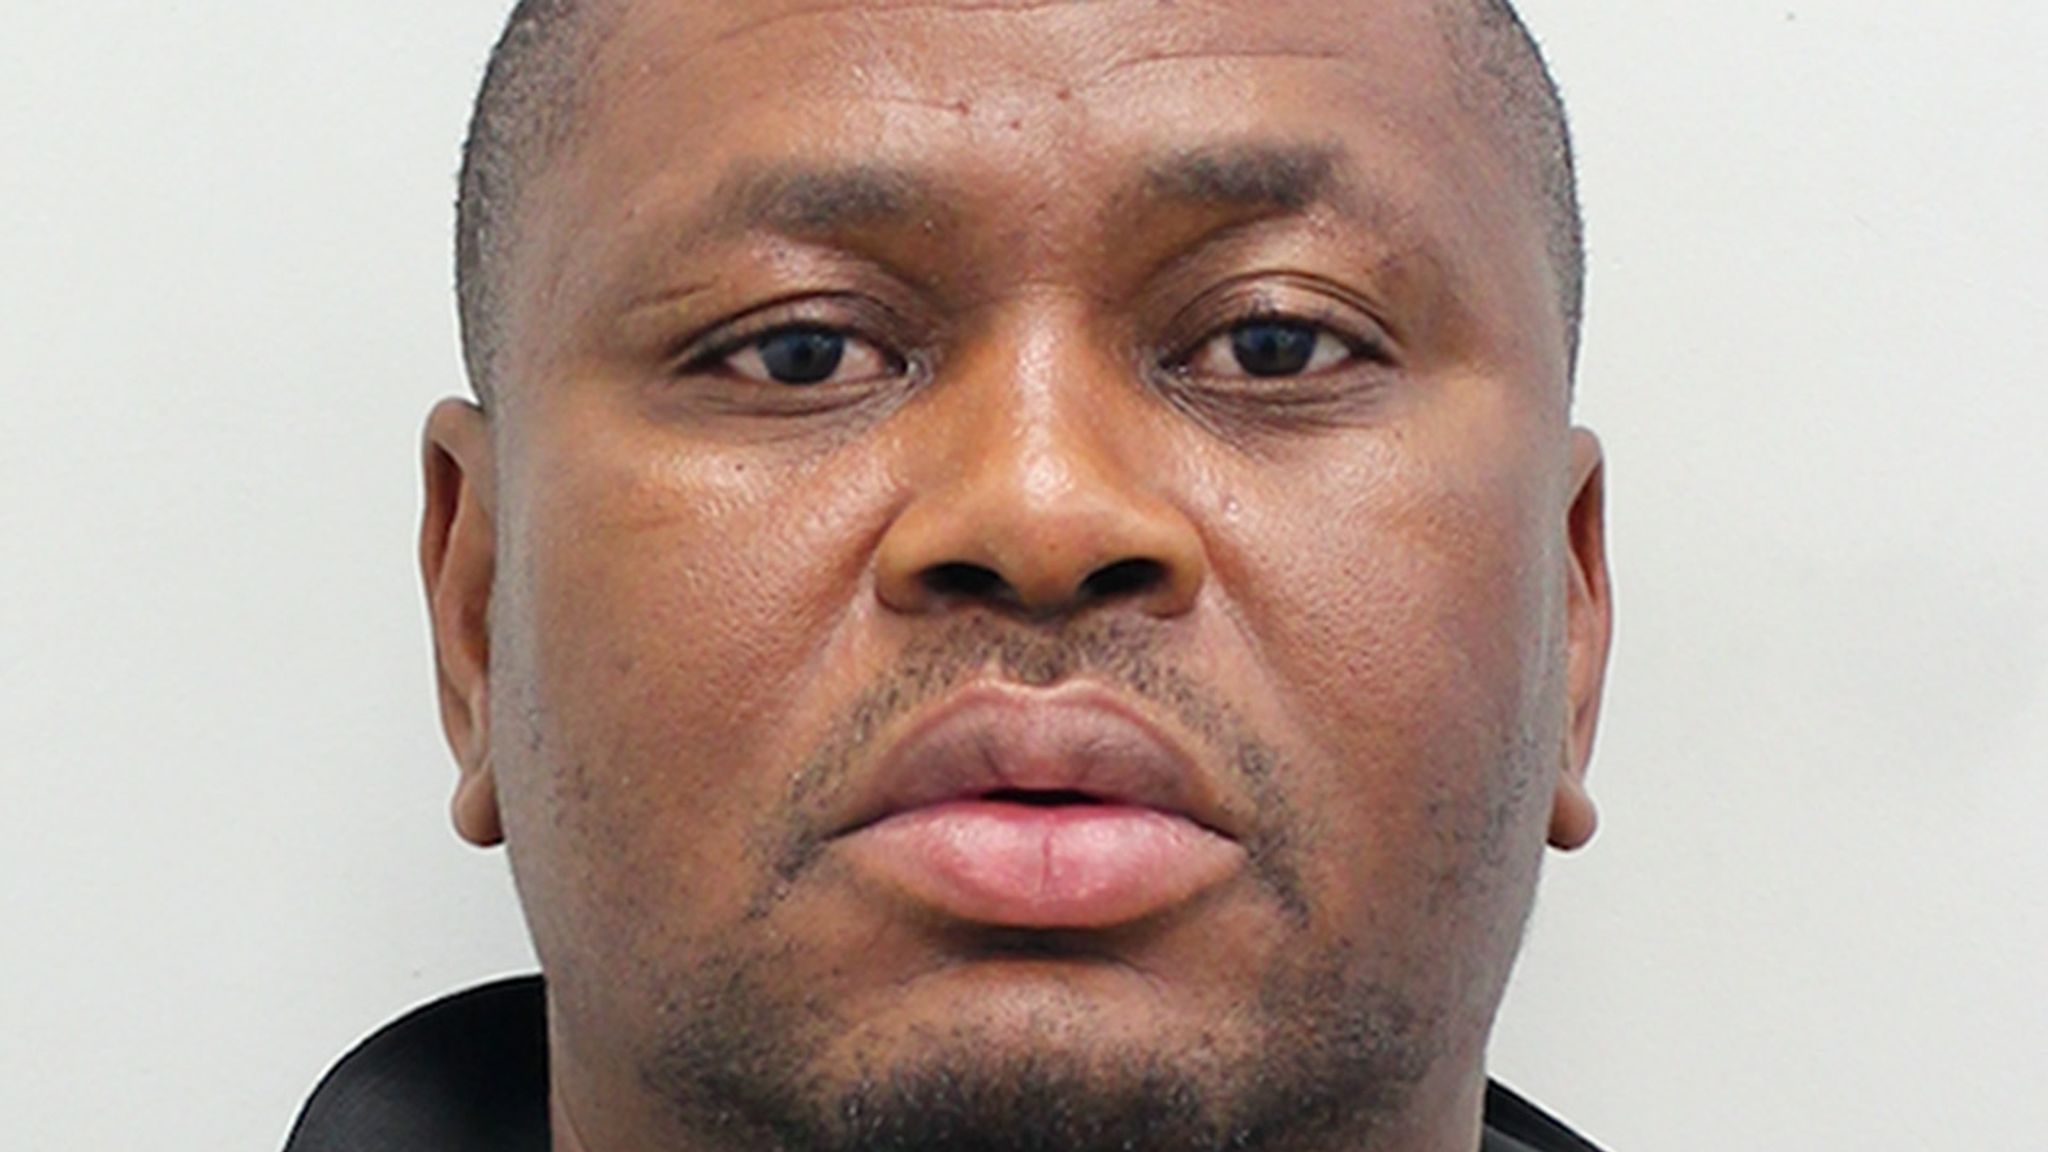 Romance fraudster Osagie Aigbonohan was jailed for more than two years. Pic: National Crime Agency